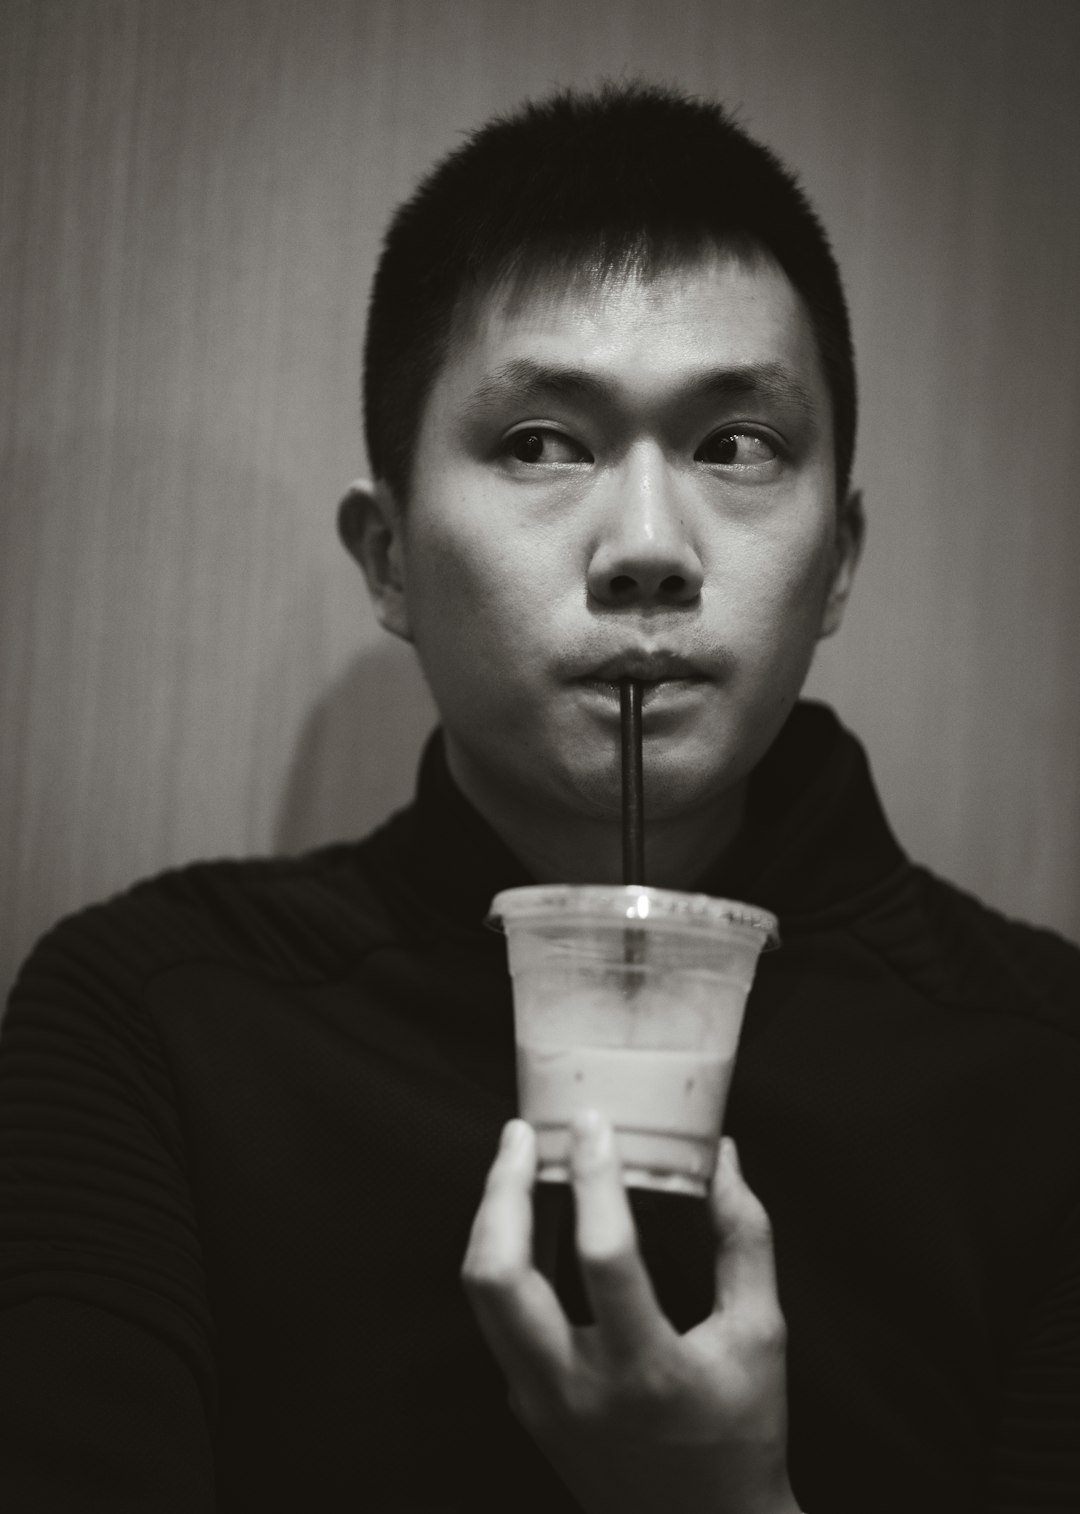 man in black shirt drinking from clear plastic cup